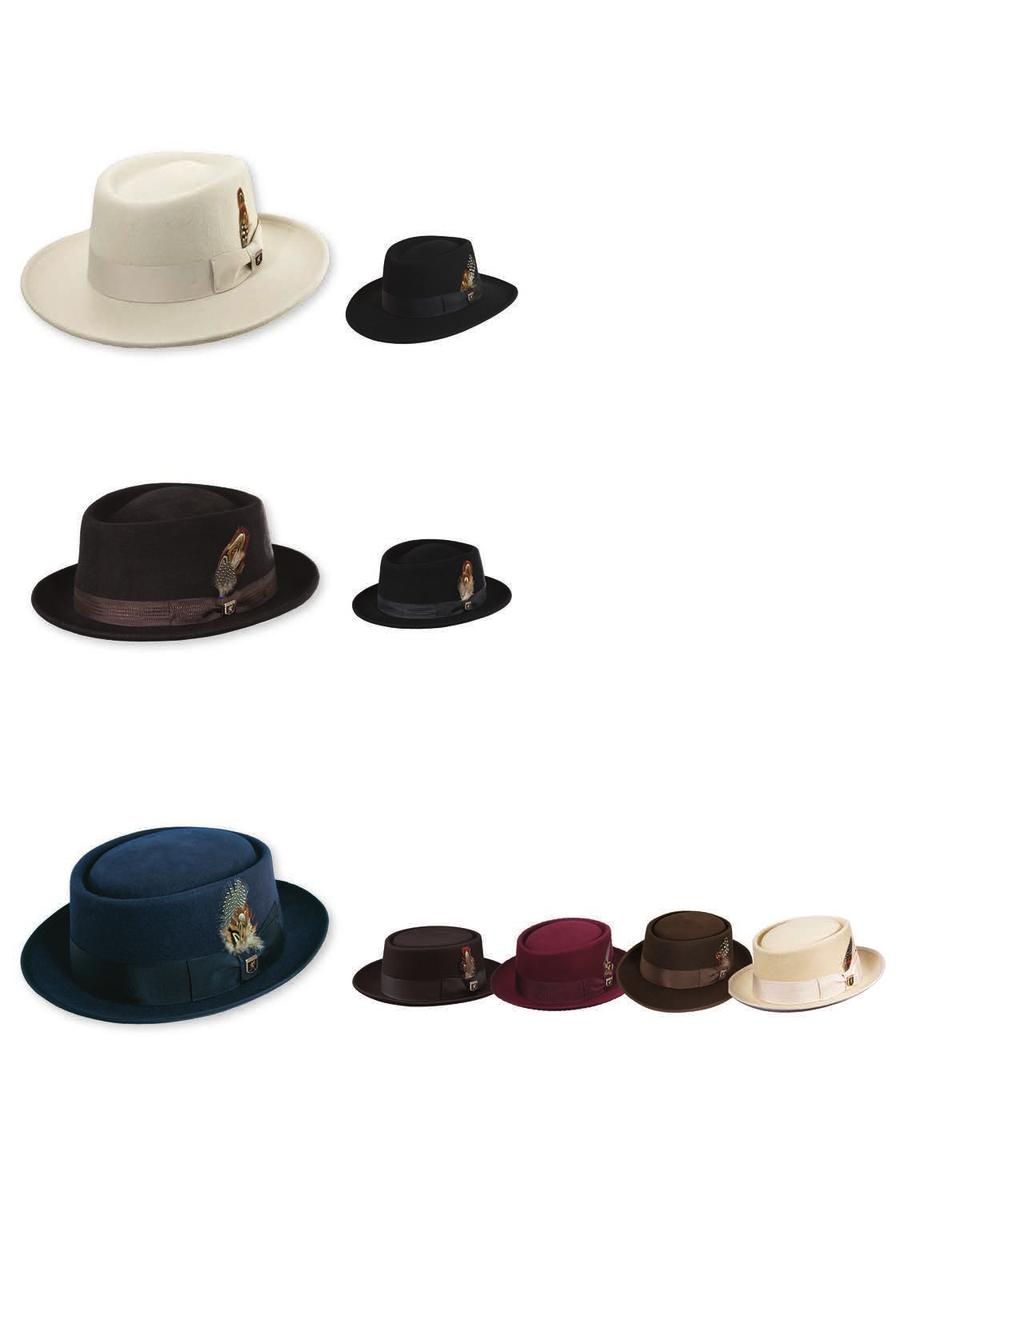 SAW570 Shape: Gambler / Material: Crushable Wool Felt / Details: 16-Ligne Grosgrain, Satin Lining Brim: 3 / Sold by Color:, Cement Size Pack: 1/S, 2/M, 2/L, 1/XL Available in B Pack: 2/M, 2/L, 1/XL,